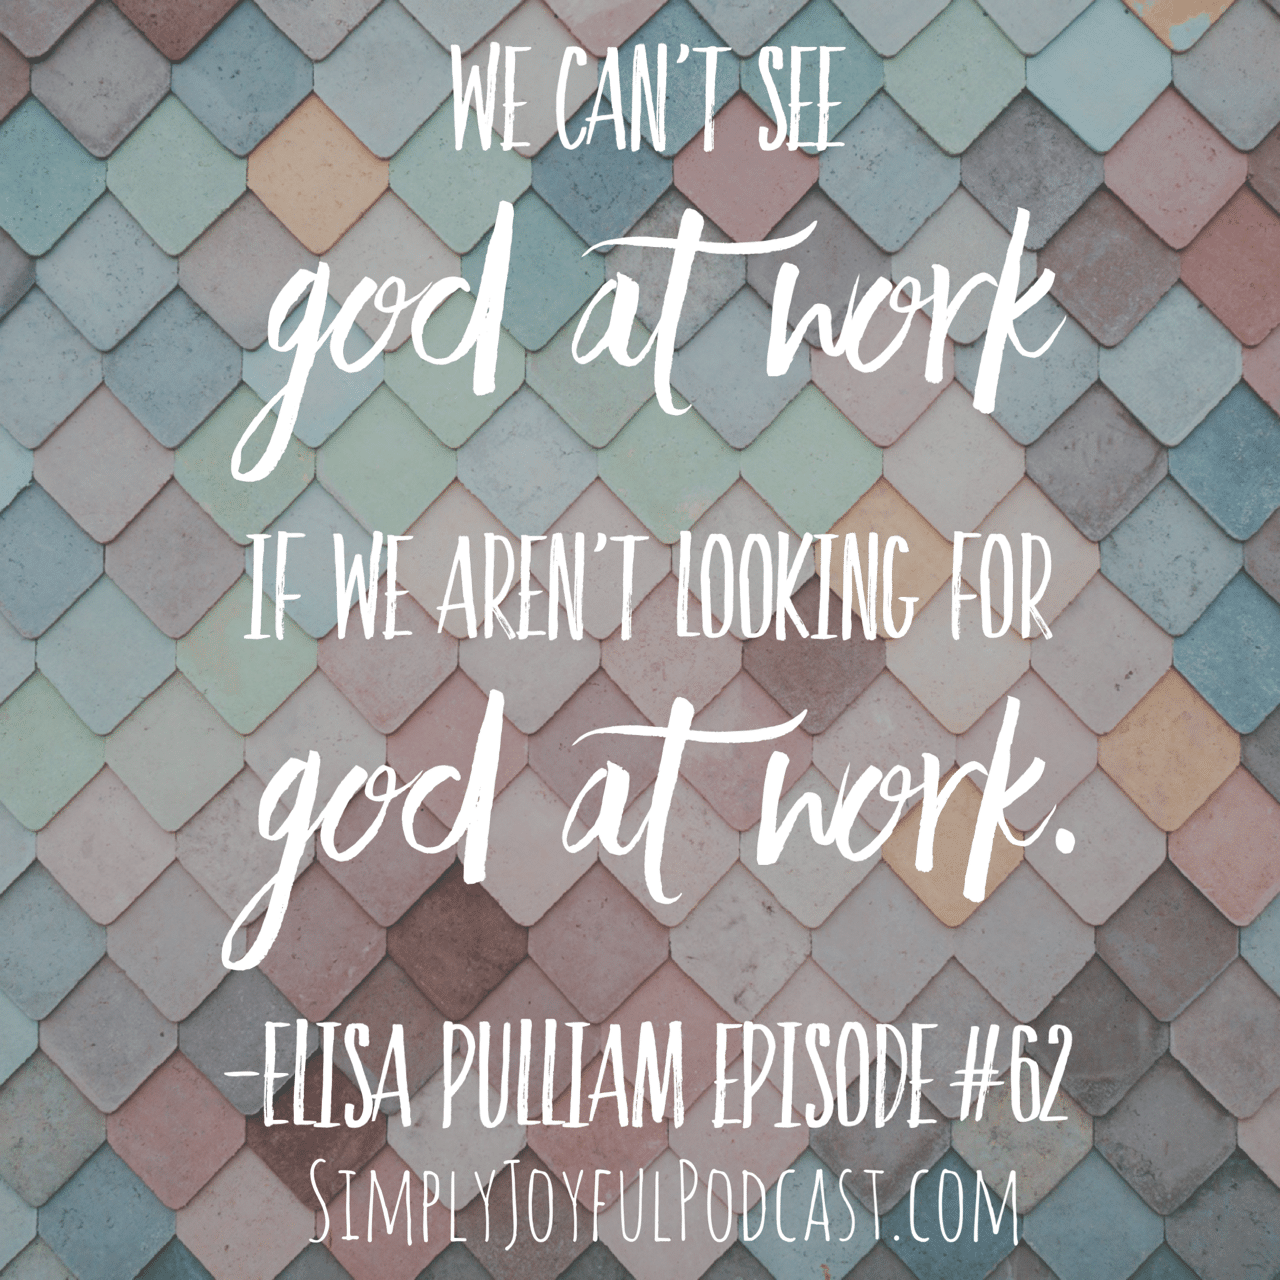 We can't see God at work if we aren't looking for God at work. 